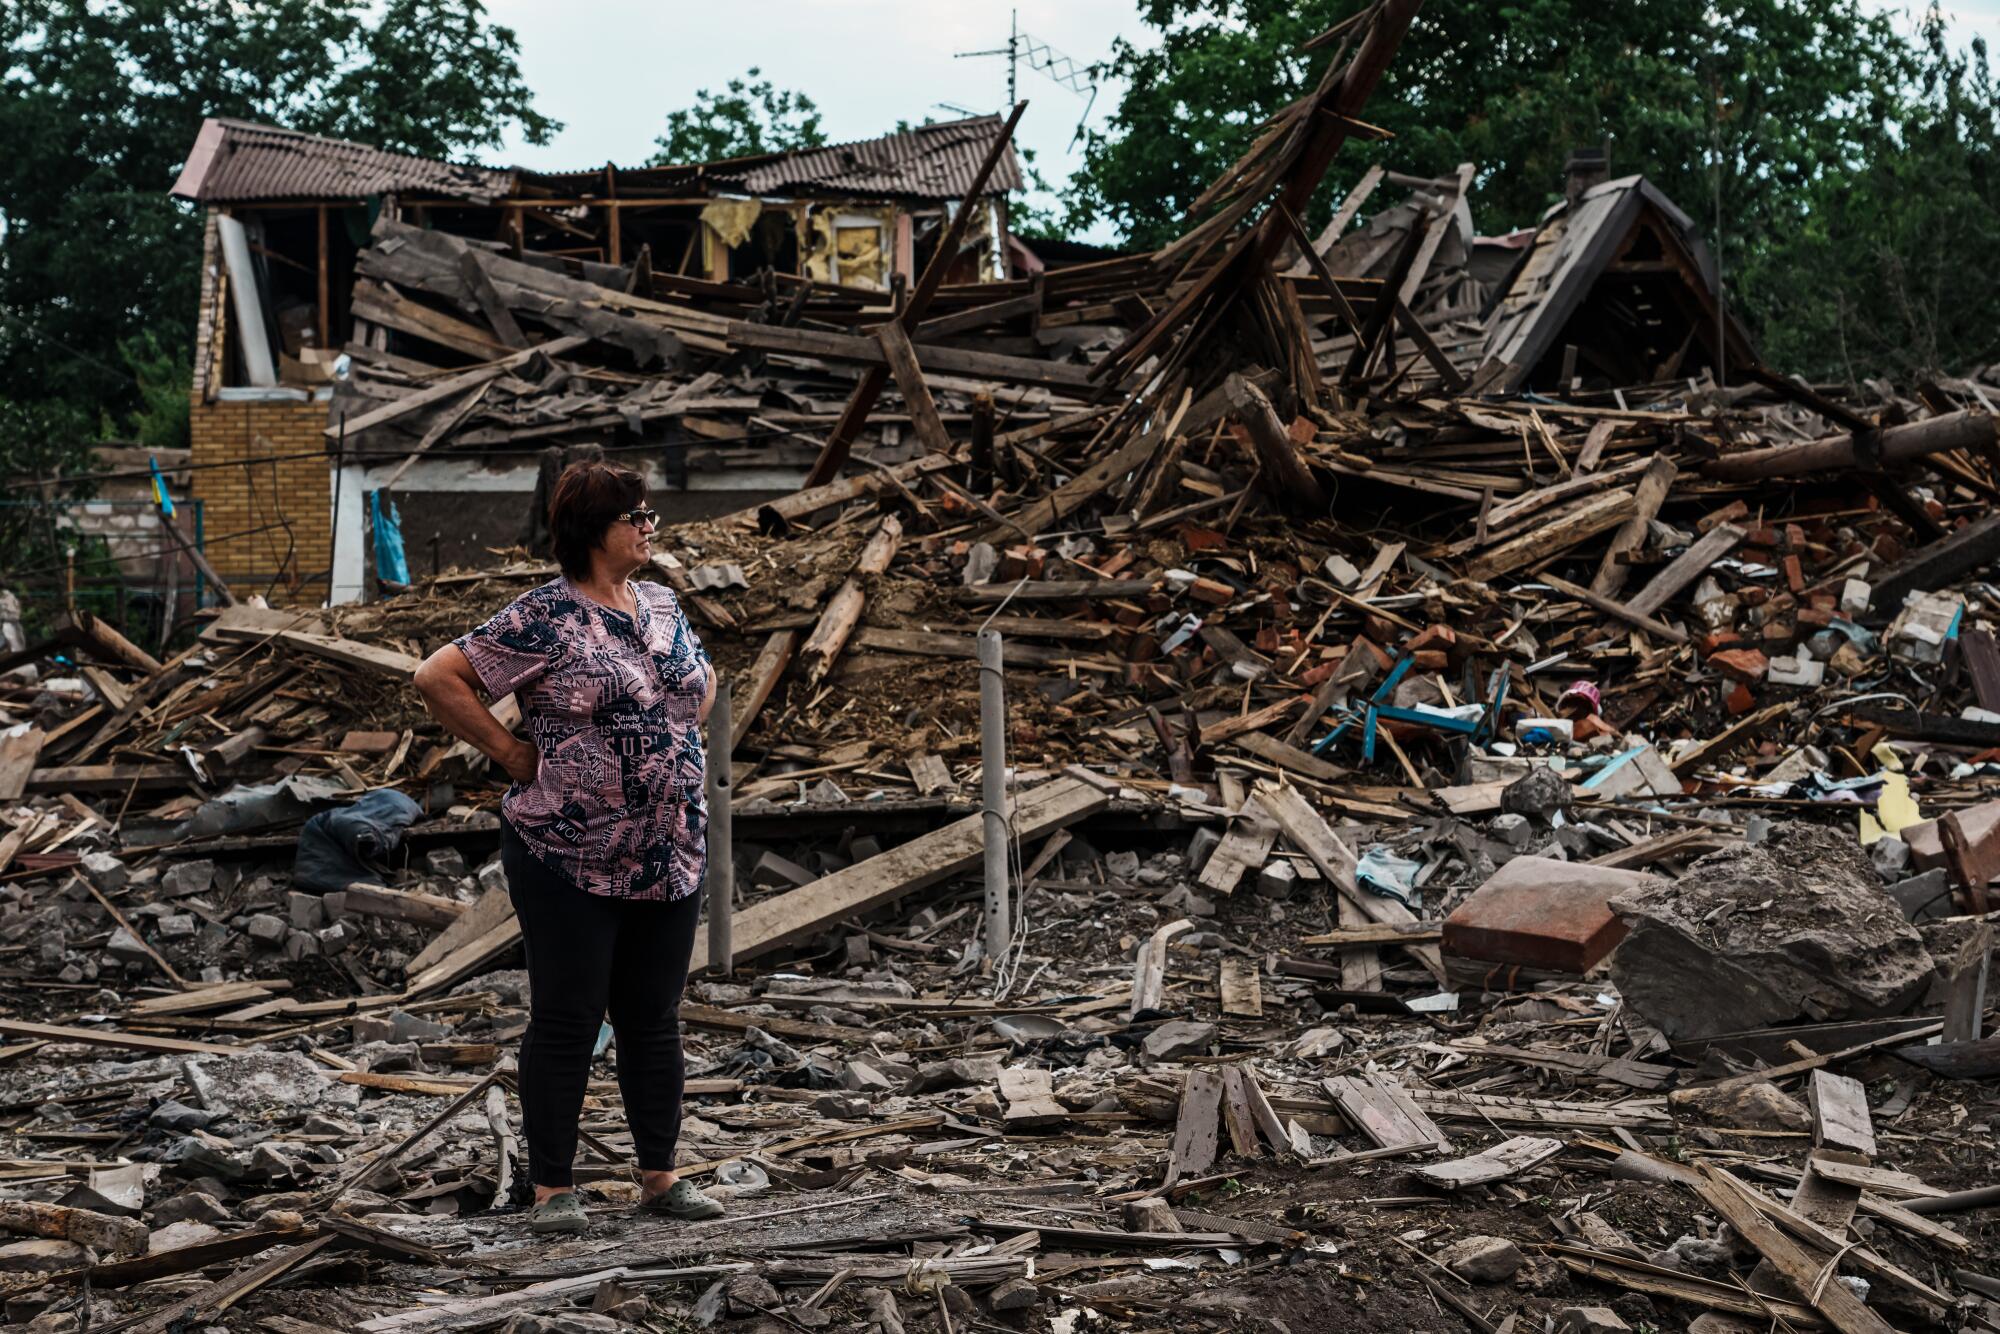 A woman looks on after a home is destroyed by a bombardment that hit a neighborhood in Dobropillya, Ukraine.